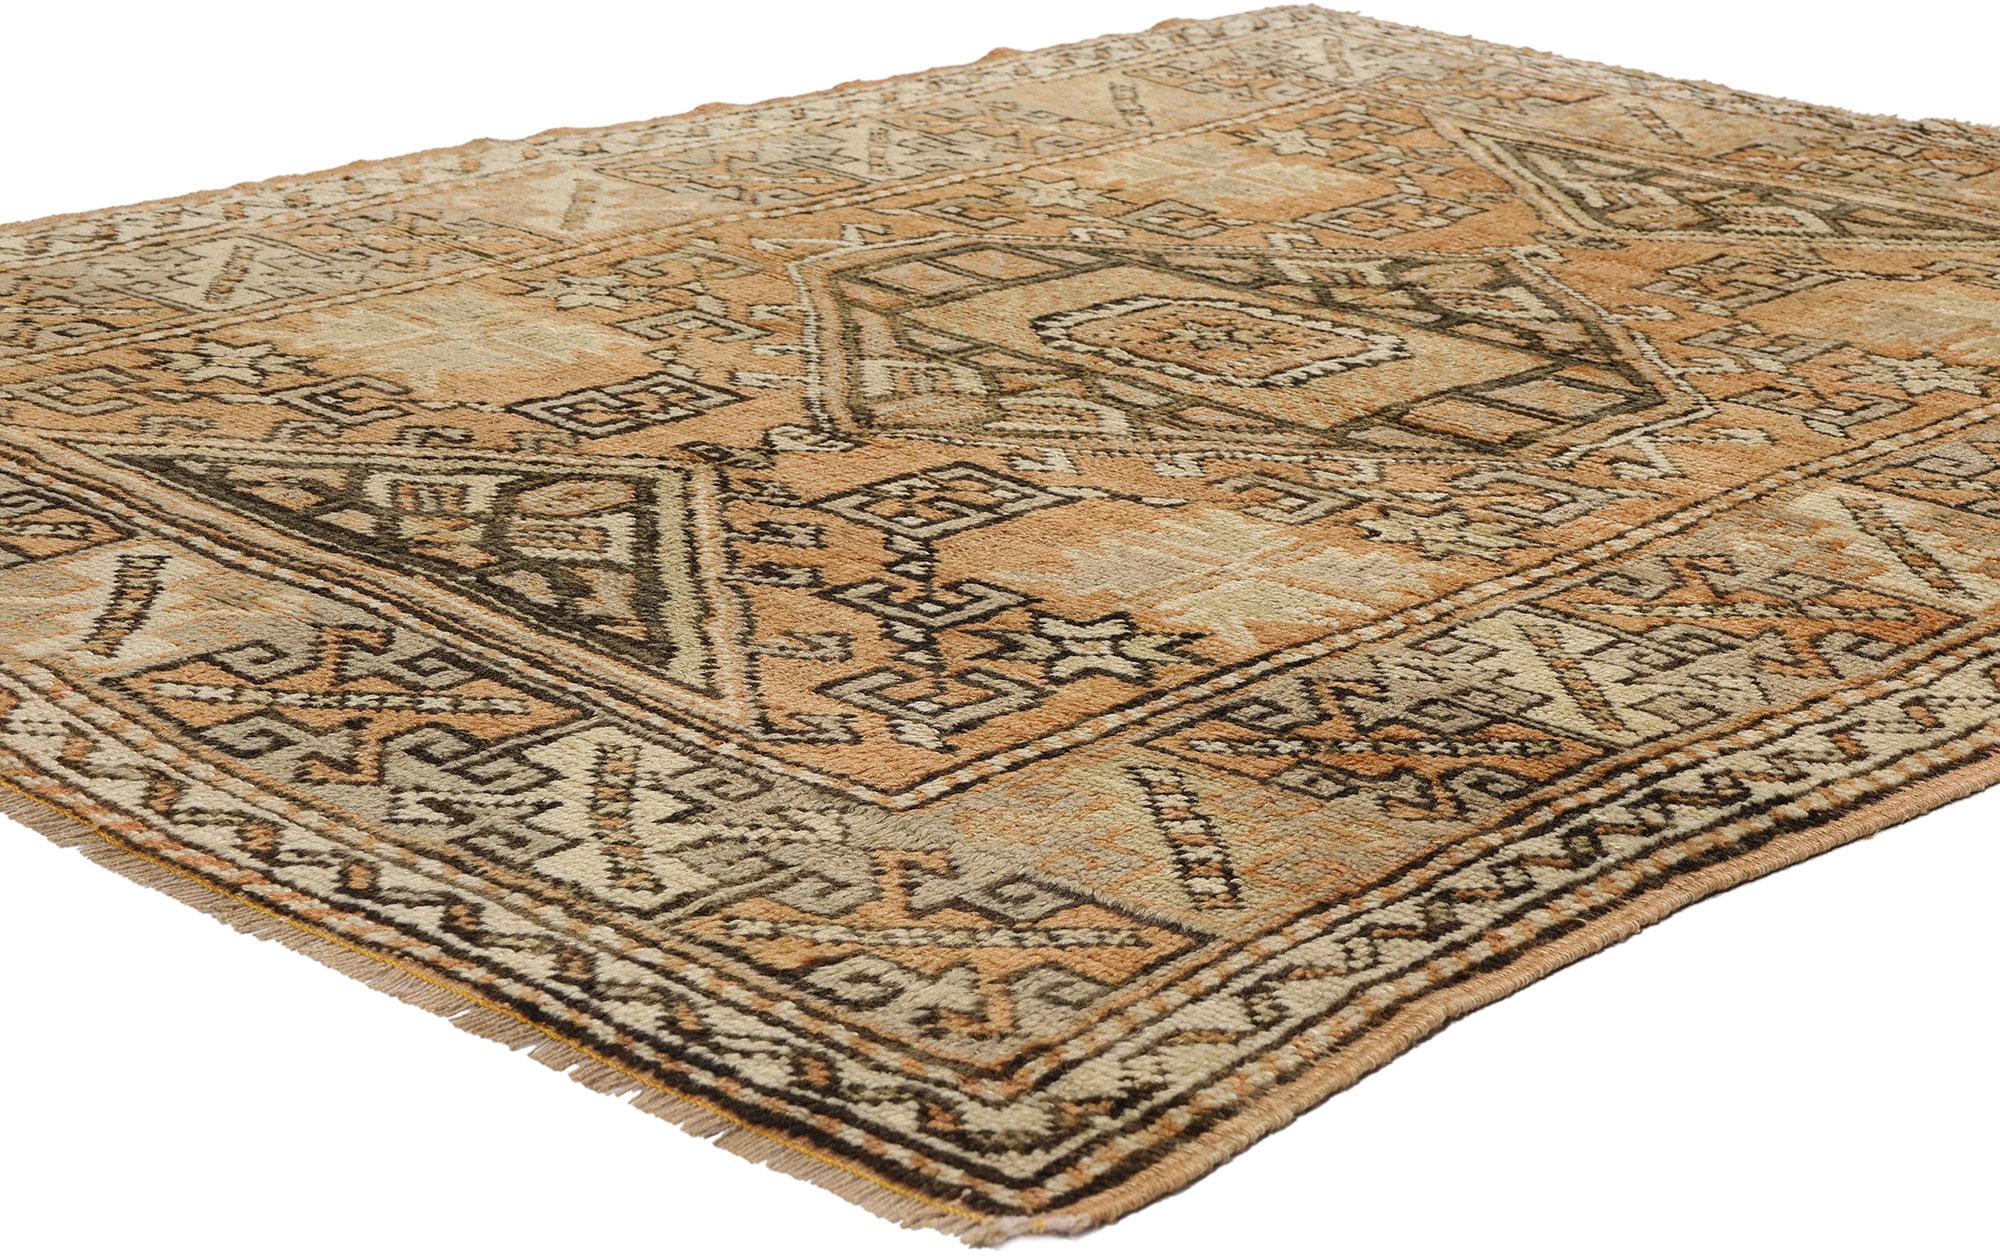 53900 Vintage Turkish Oushak Rug, 04'04 x 05'06. Marrying rustic Bohemian allure with nomadic charm, this hand-knotted wool Turkish Oushak rug delights with its earthy tones and intricate tribal motifs. Anchoring its design is a mesmerizing hooked